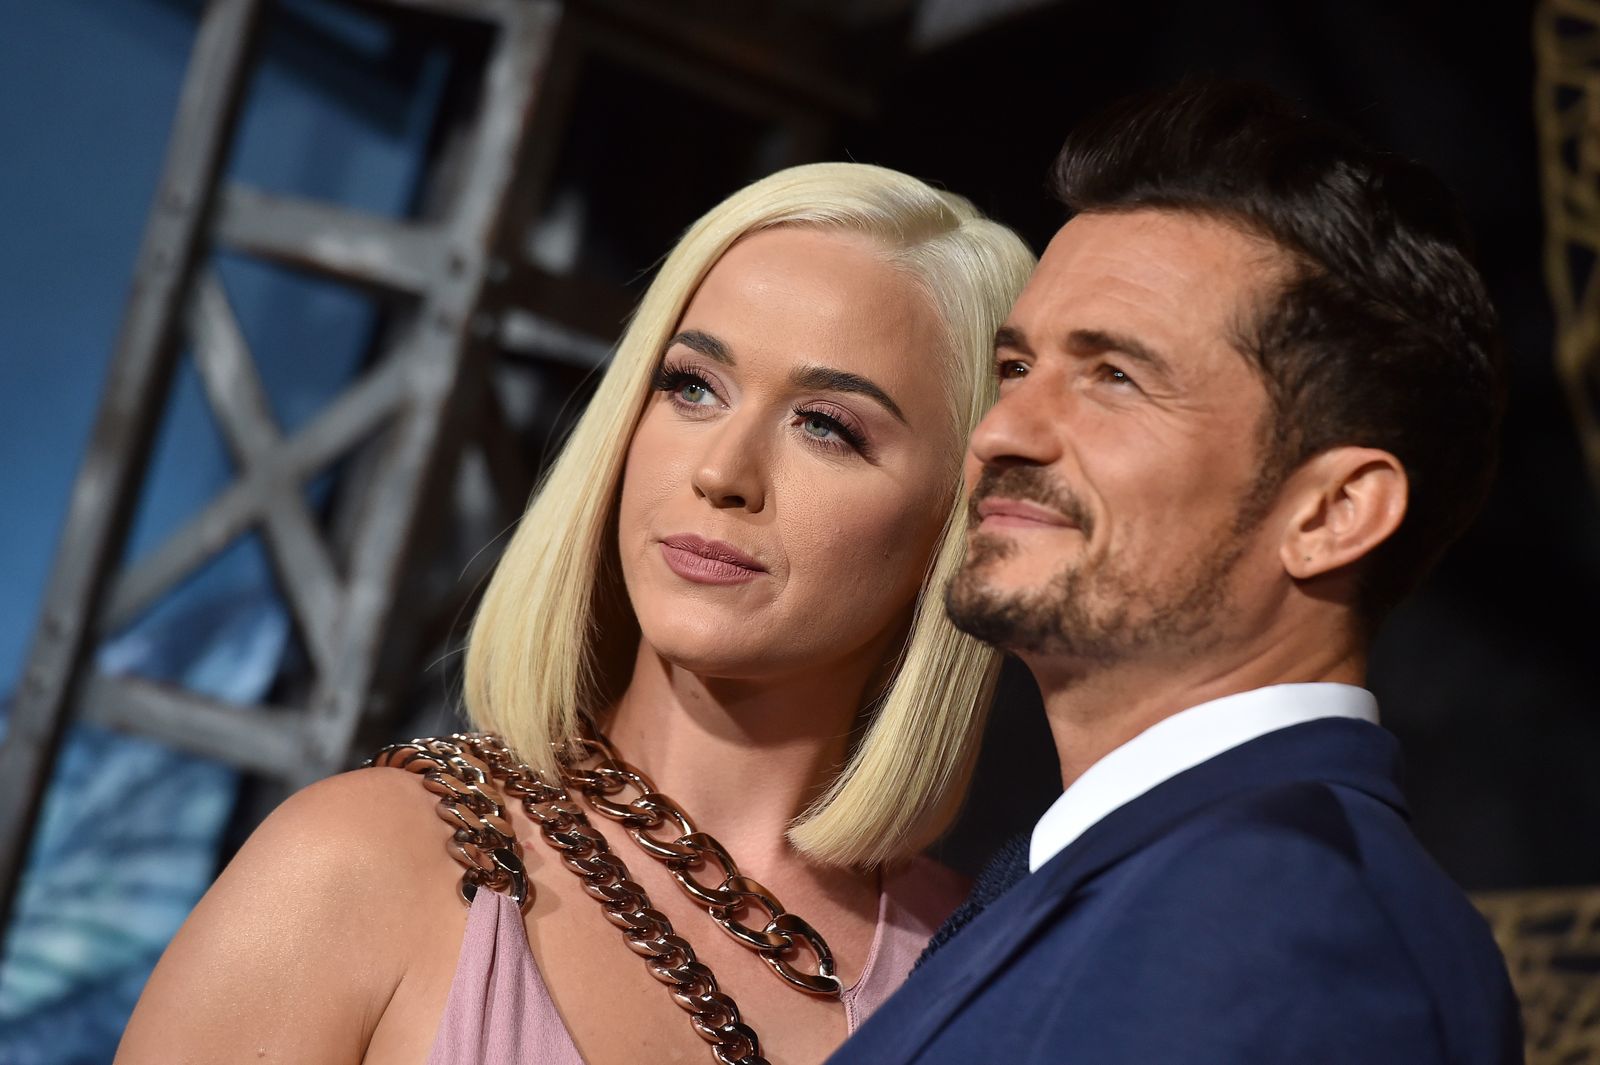 Katy Perry and Orlando Bloom at the Los Angeles premiere of "Carnival Row" on August 21, 2019, in Hollywood, California | Photo: Axelle/Bauer-Griffin/FilmMagic/Getty Images